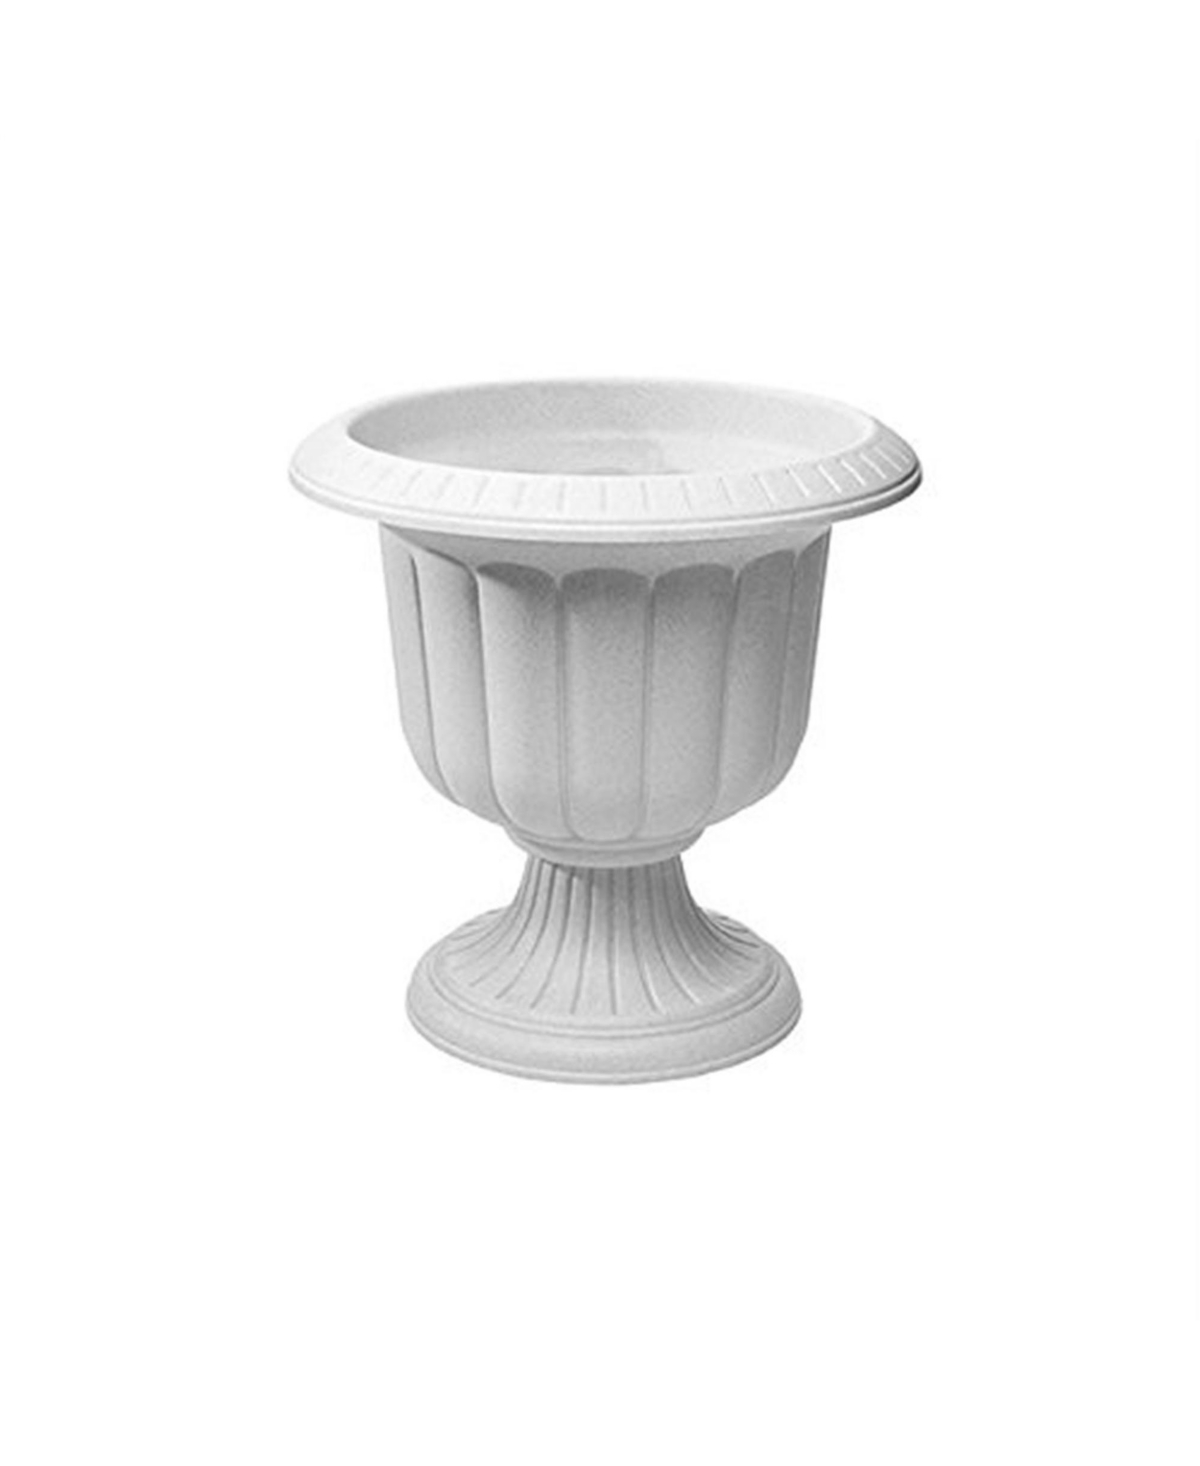 Classic Urn Plastic Planter Stone Colored - 14 Inch Pack of 1 - Grey